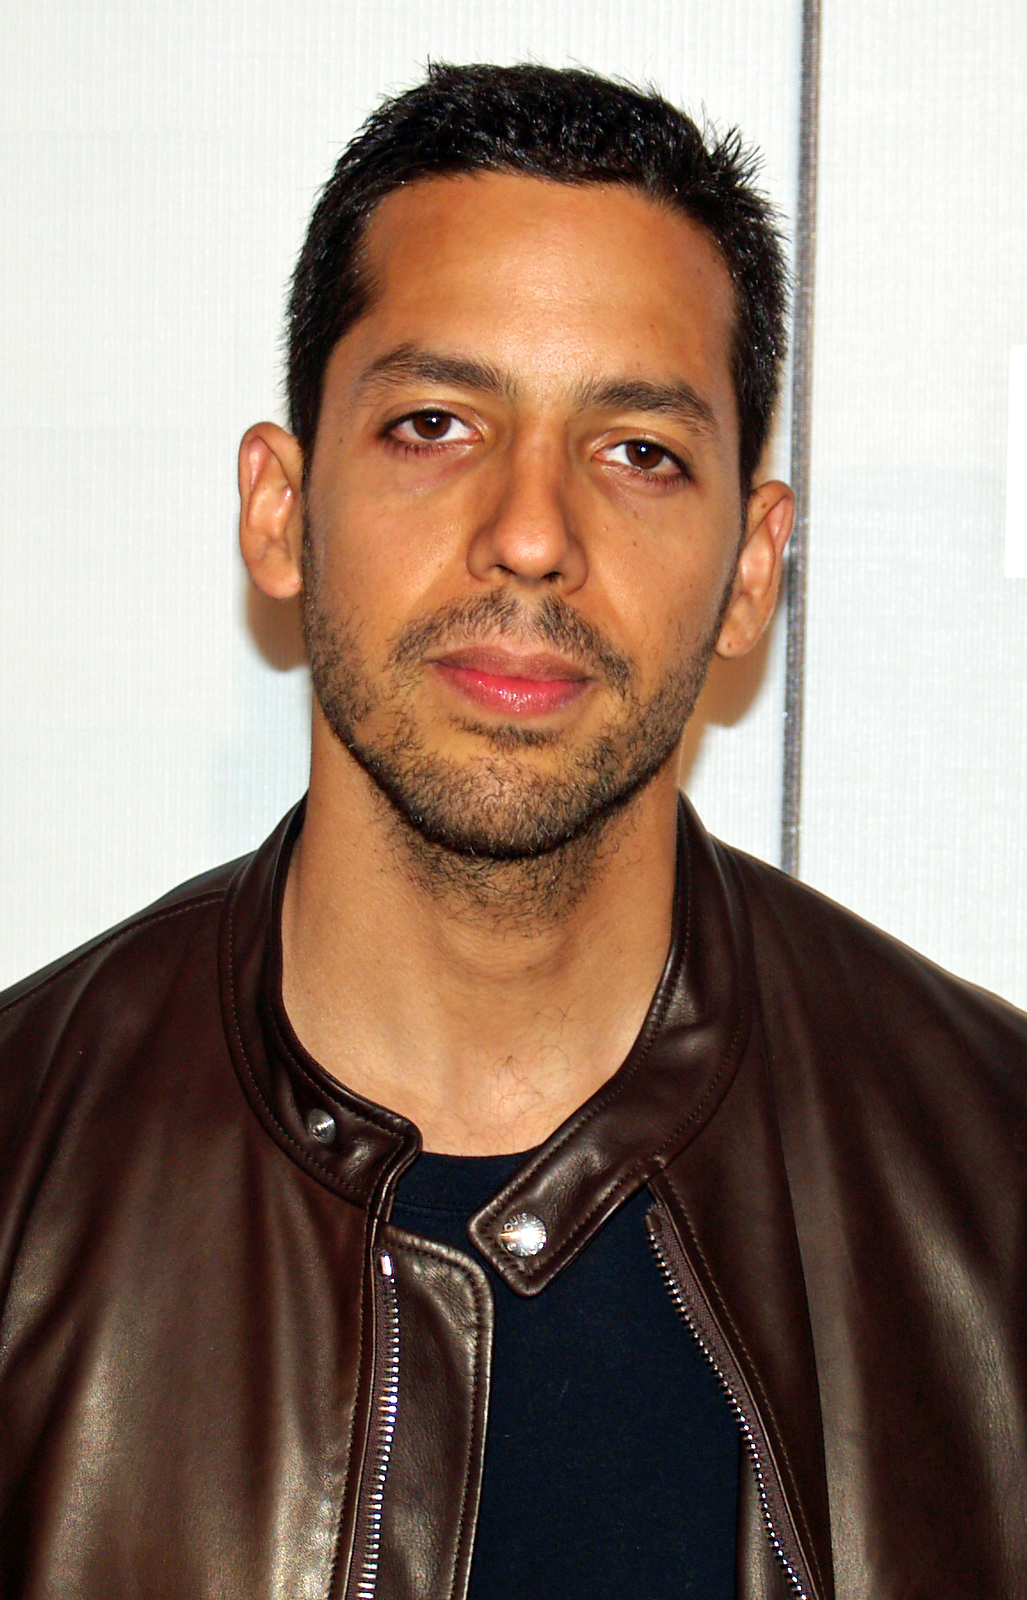 This is David Blaine's first picture